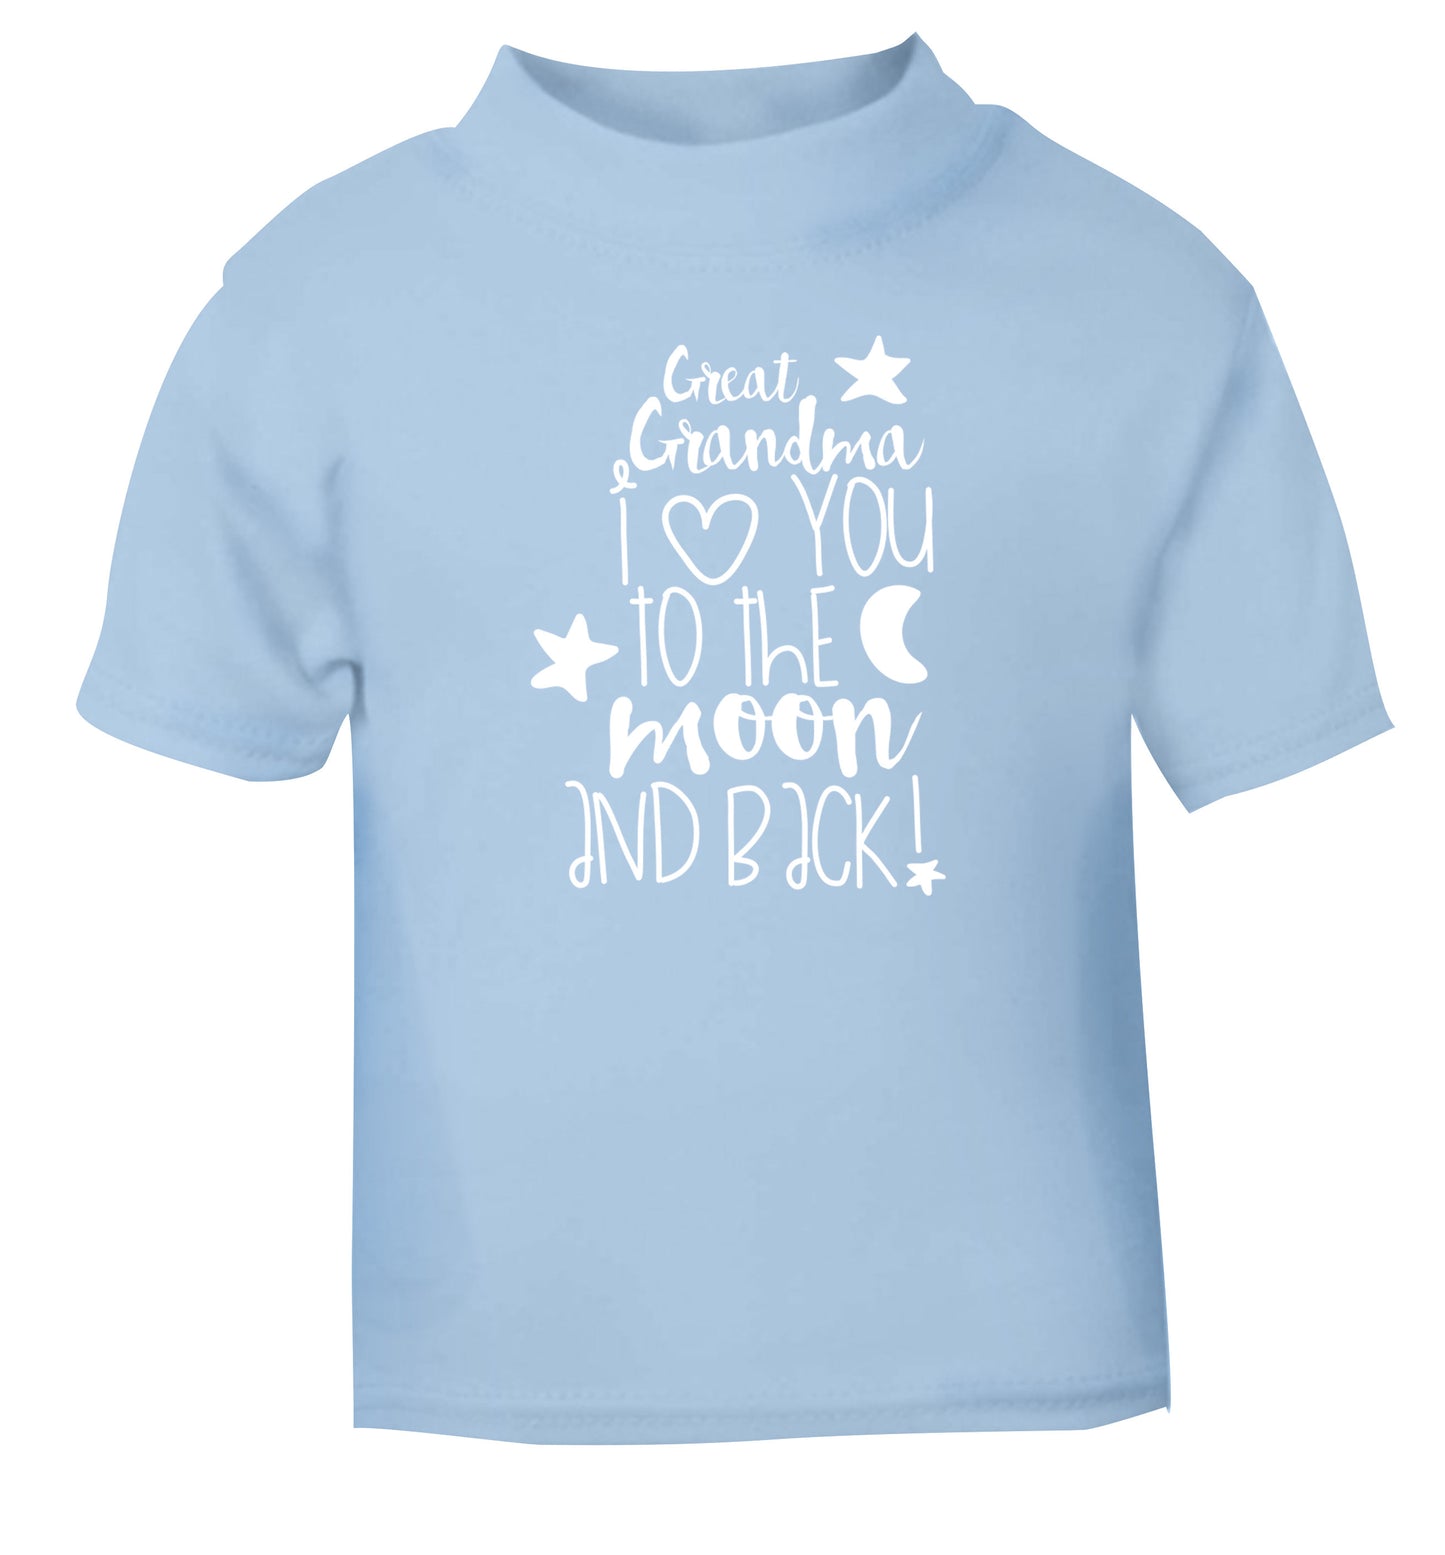 Great Grandma I love you to the moon and back light blue Baby Toddler Tshirt 2 Years